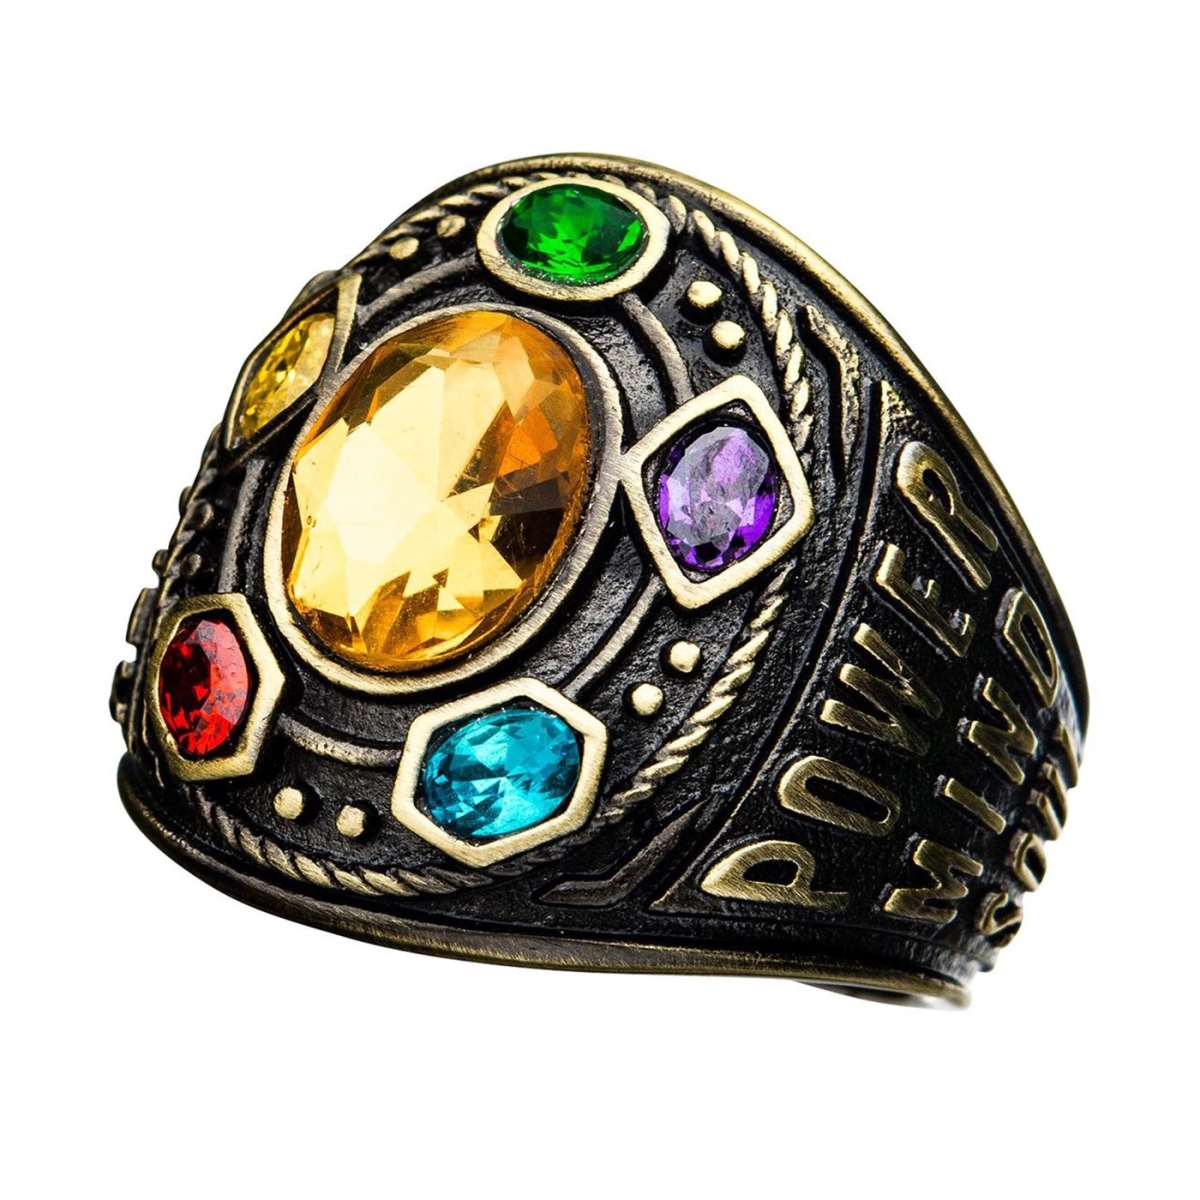 Picture of Avengers Endgame ringthanosgcoipr-11-Size 11 Avengers Endgame Infinity Gauntlet Class of Infinite Power Ring - Size 11